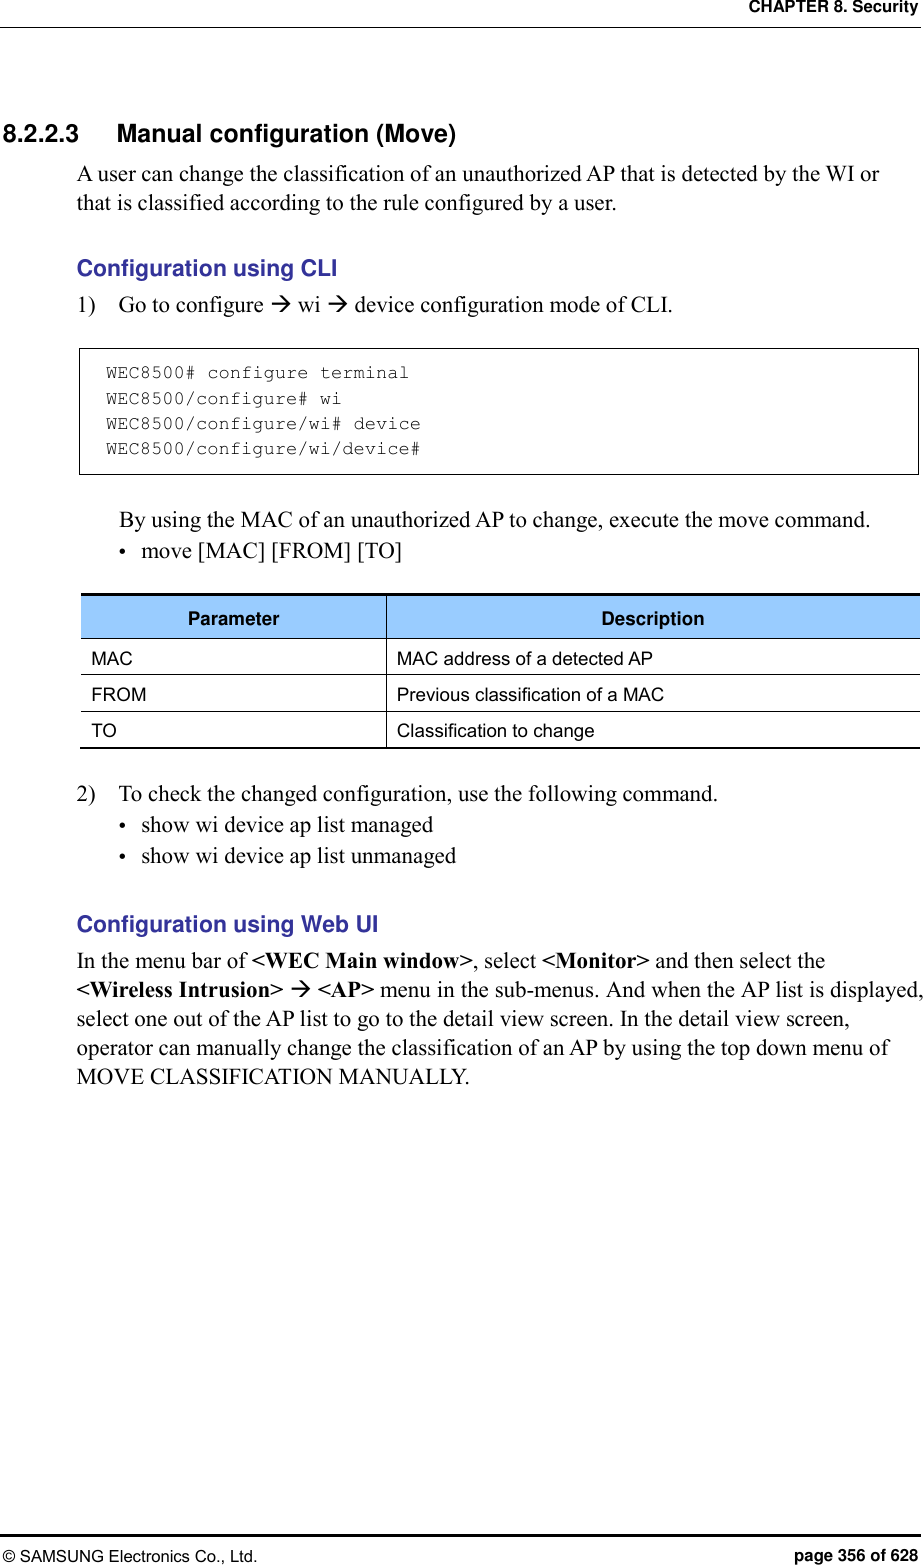 CHAPTER 8. Security © SAMSUNG Electronics Co., Ltd.  page 356 of 628 8.2.2.3  Manual configuration (Move) A user can change the classification of an unauthorized AP that is detected by the WI or that is classified according to the rule configured by a user.  Configuration using CLI 1)    Go to configure  wi  device configuration mode of CLI.  WEC8500# configure terminal WEC8500/configure# wi WEC8500/configure/wi# device WEC8500/configure/wi/device#  By using the MAC of an unauthorized AP to change, execute the move command.  move [MAC] [FROM] [TO]  Parameter Description MAC MAC address of a detected AP FROM Previous classification of a MAC TO Classification to change  2)    To check the changed configuration, use the following command.  show wi device ap list managed  show wi device ap list unmanaged  Configuration using Web UI In the menu bar of &lt;WEC Main window&gt;, select &lt;Monitor&gt; and then select the &lt;Wireless Intrusion&gt;  &lt;AP&gt; menu in the sub-menus. And when the AP list is displayed, select one out of the AP list to go to the detail view screen. In the detail view screen, operator can manually change the classification of an AP by using the top down menu of MOVE CLASSIFICATION MANUALLY.    